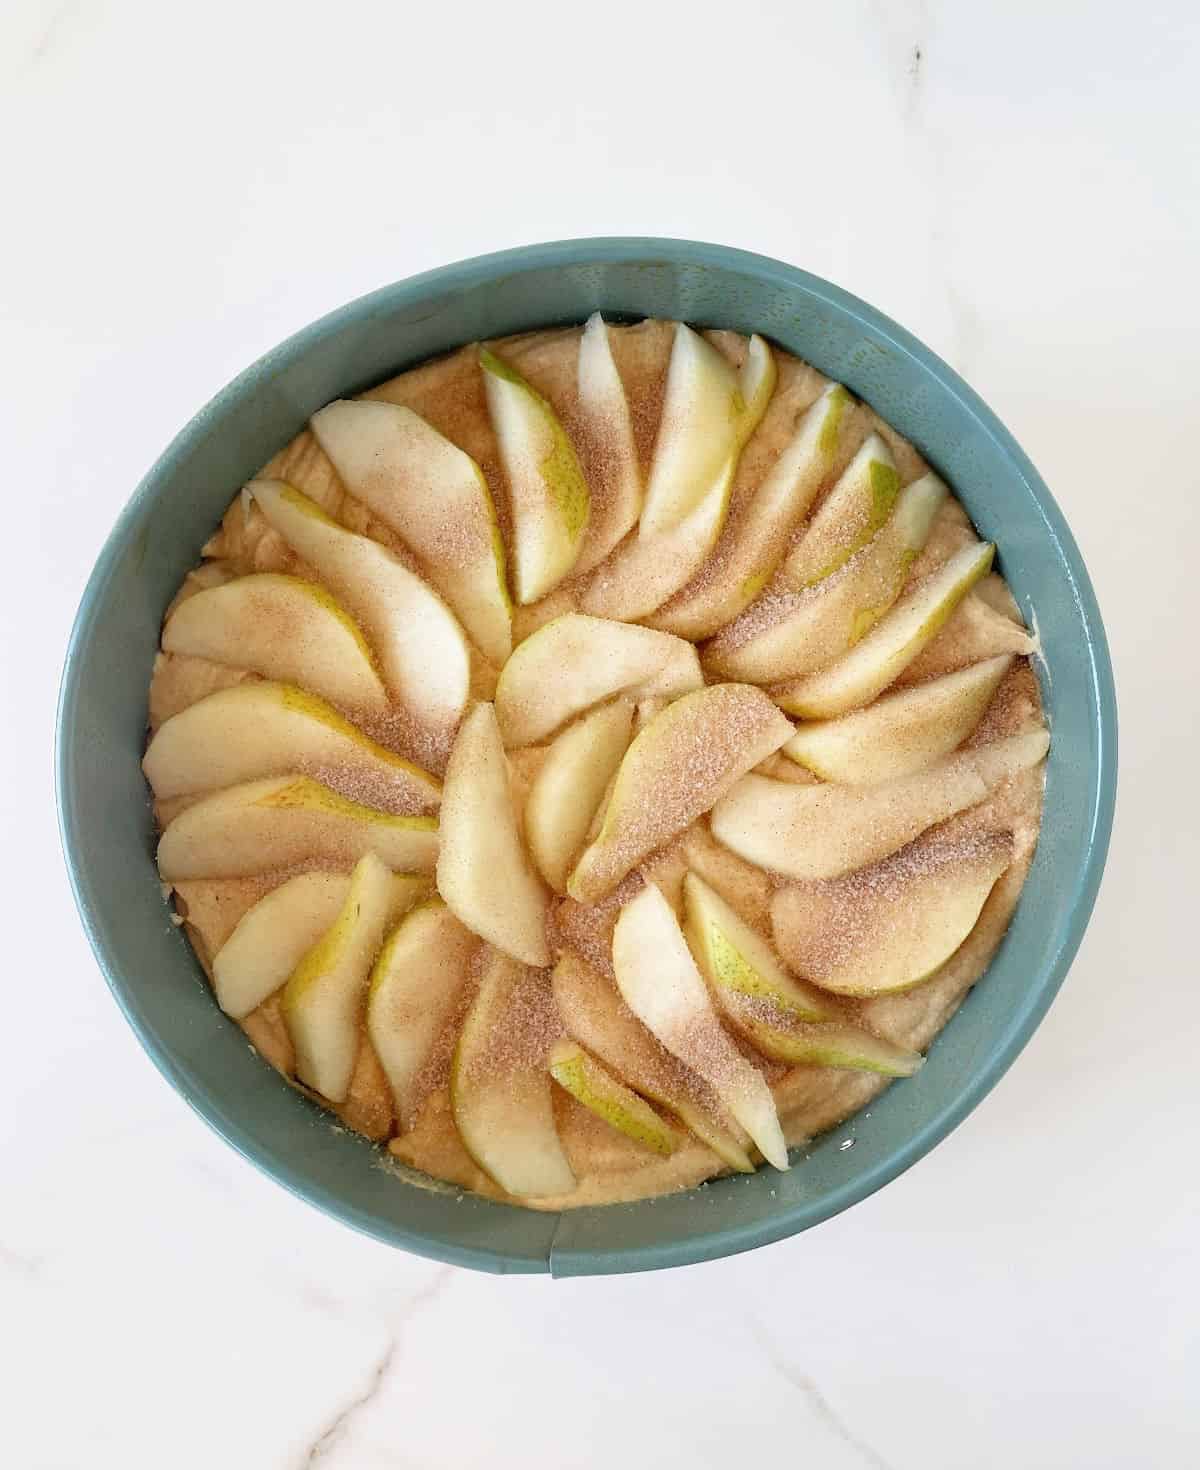 Pear slices with cinnamon sugar on cake batter on a teal round pan on white marble surface. 